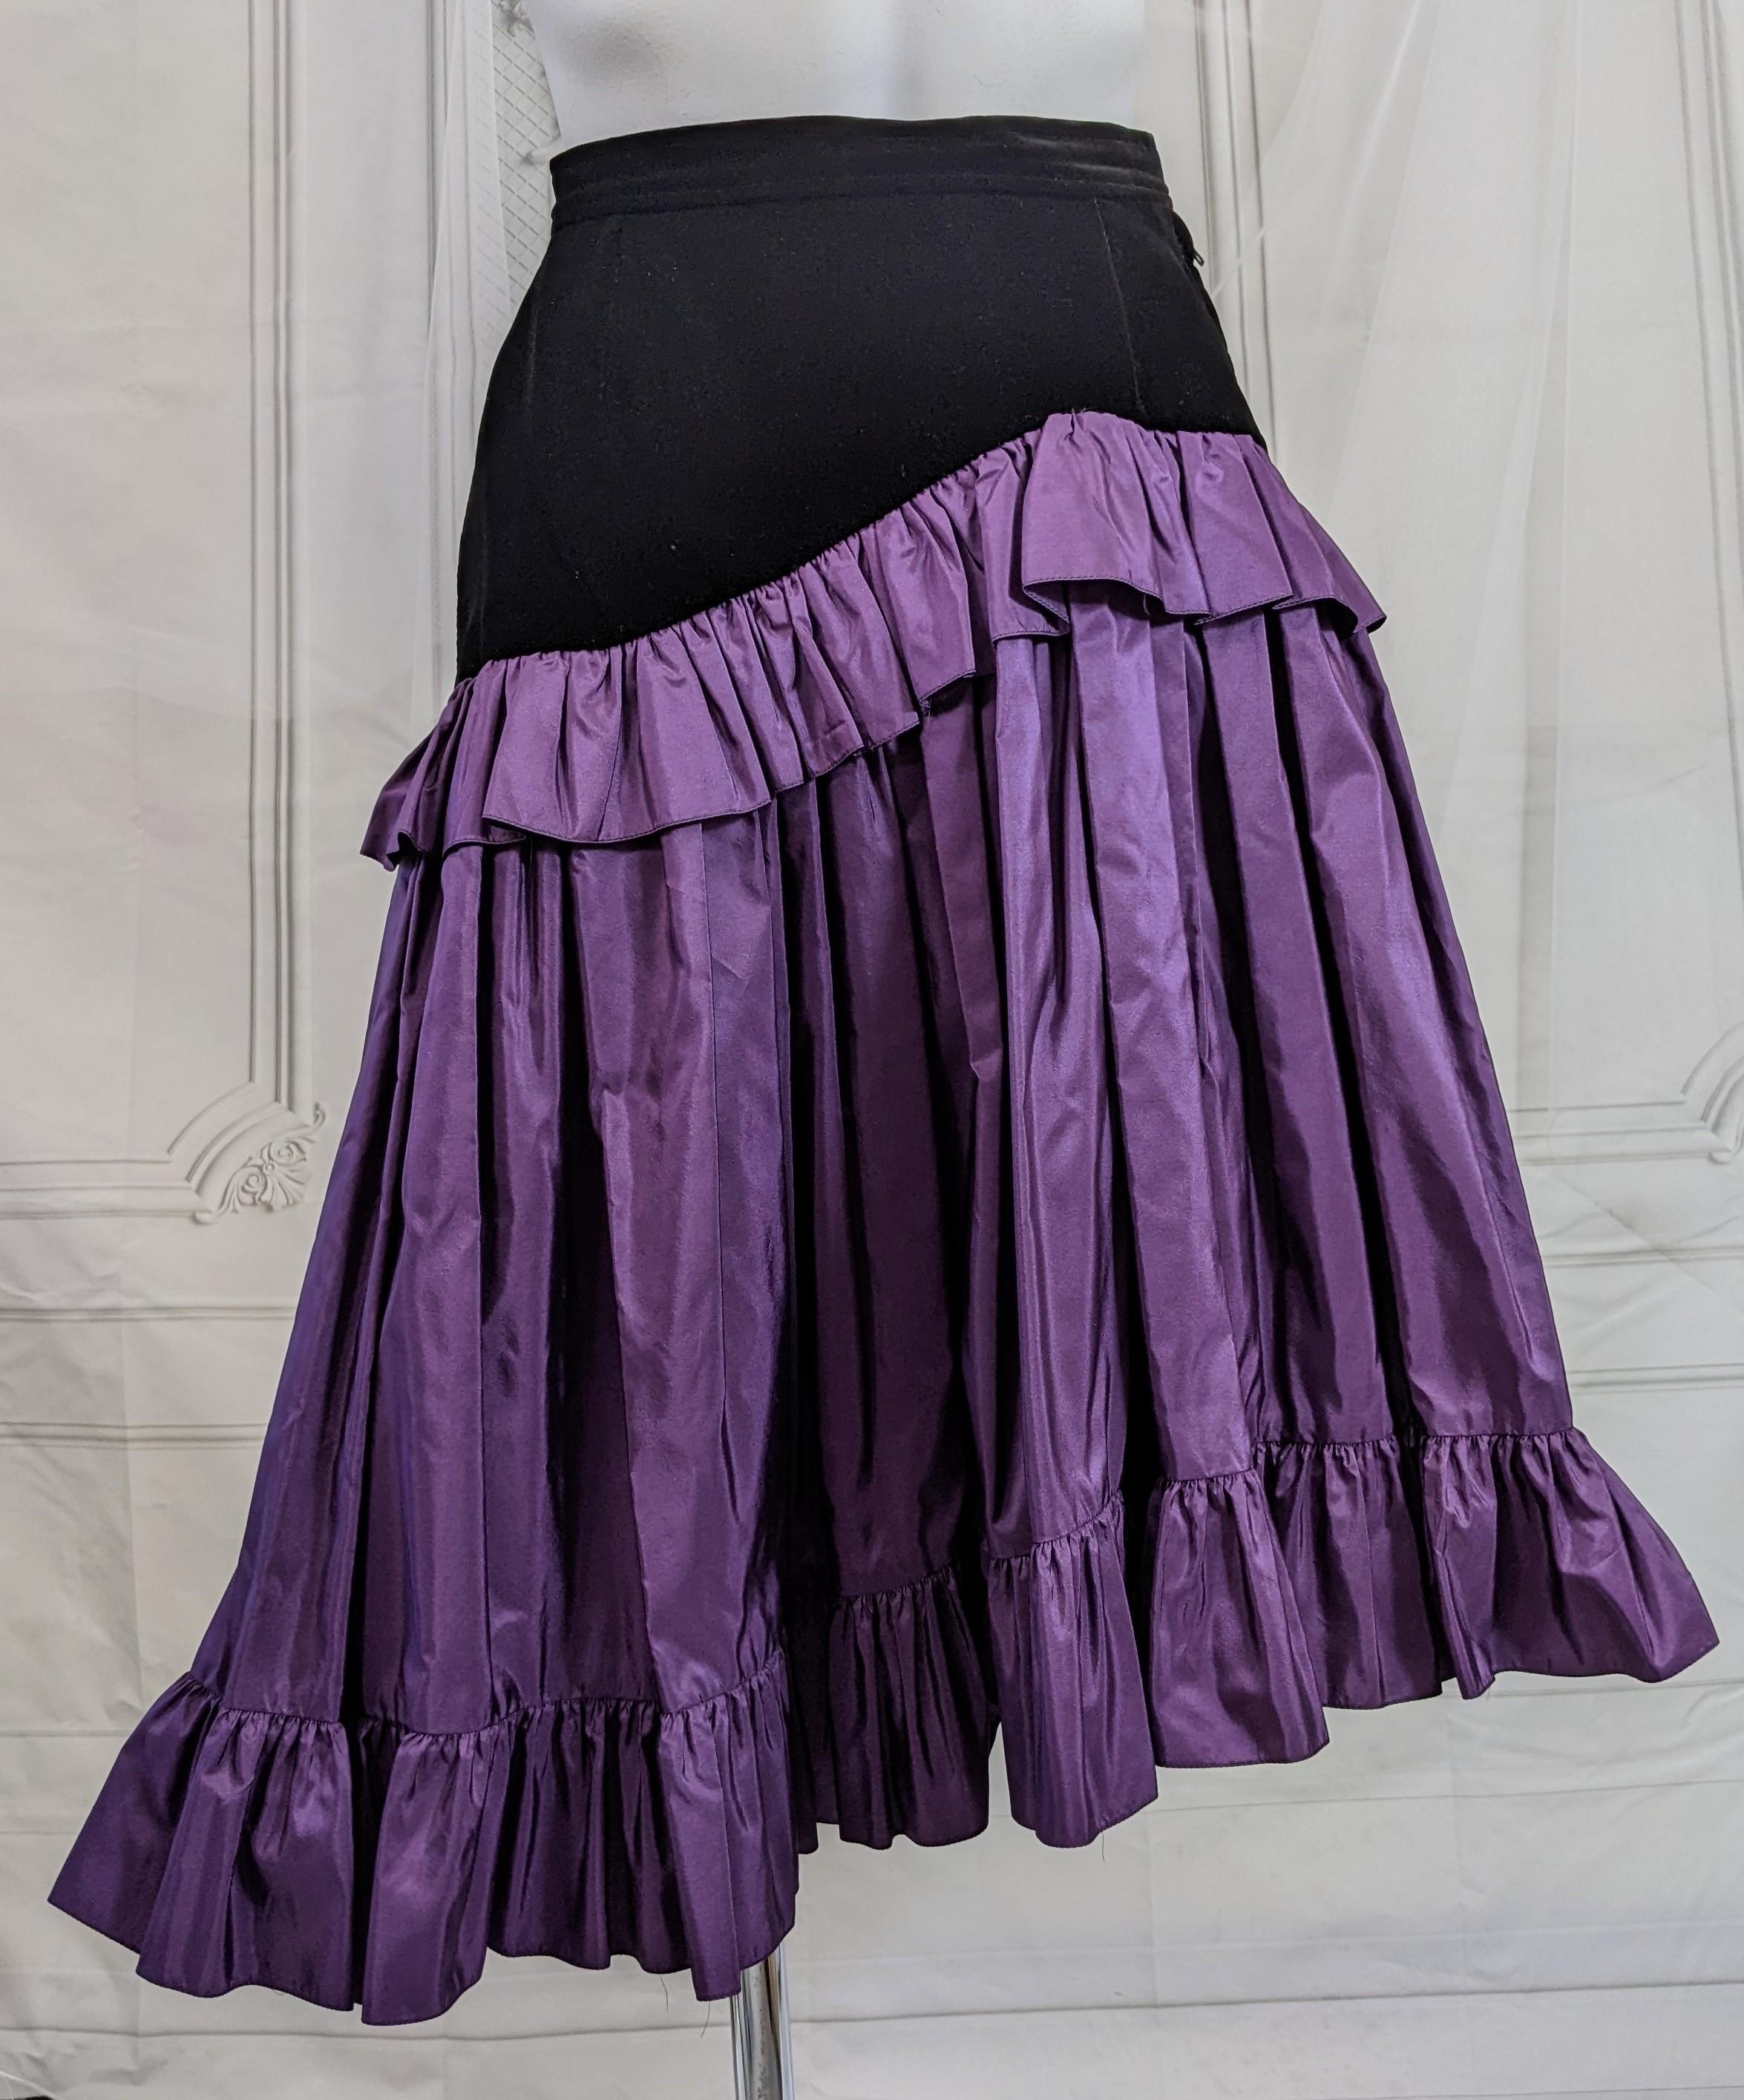 Yves Saint Laurent Velvet and Taffeta Skirt, Russian Collection. Black velvet mixed with iridiscent purple silk taffeta which is hiked up slightly at left hip and trimmed with ruffles through out.
1970's France, Vintage size 34. France.
Length 25